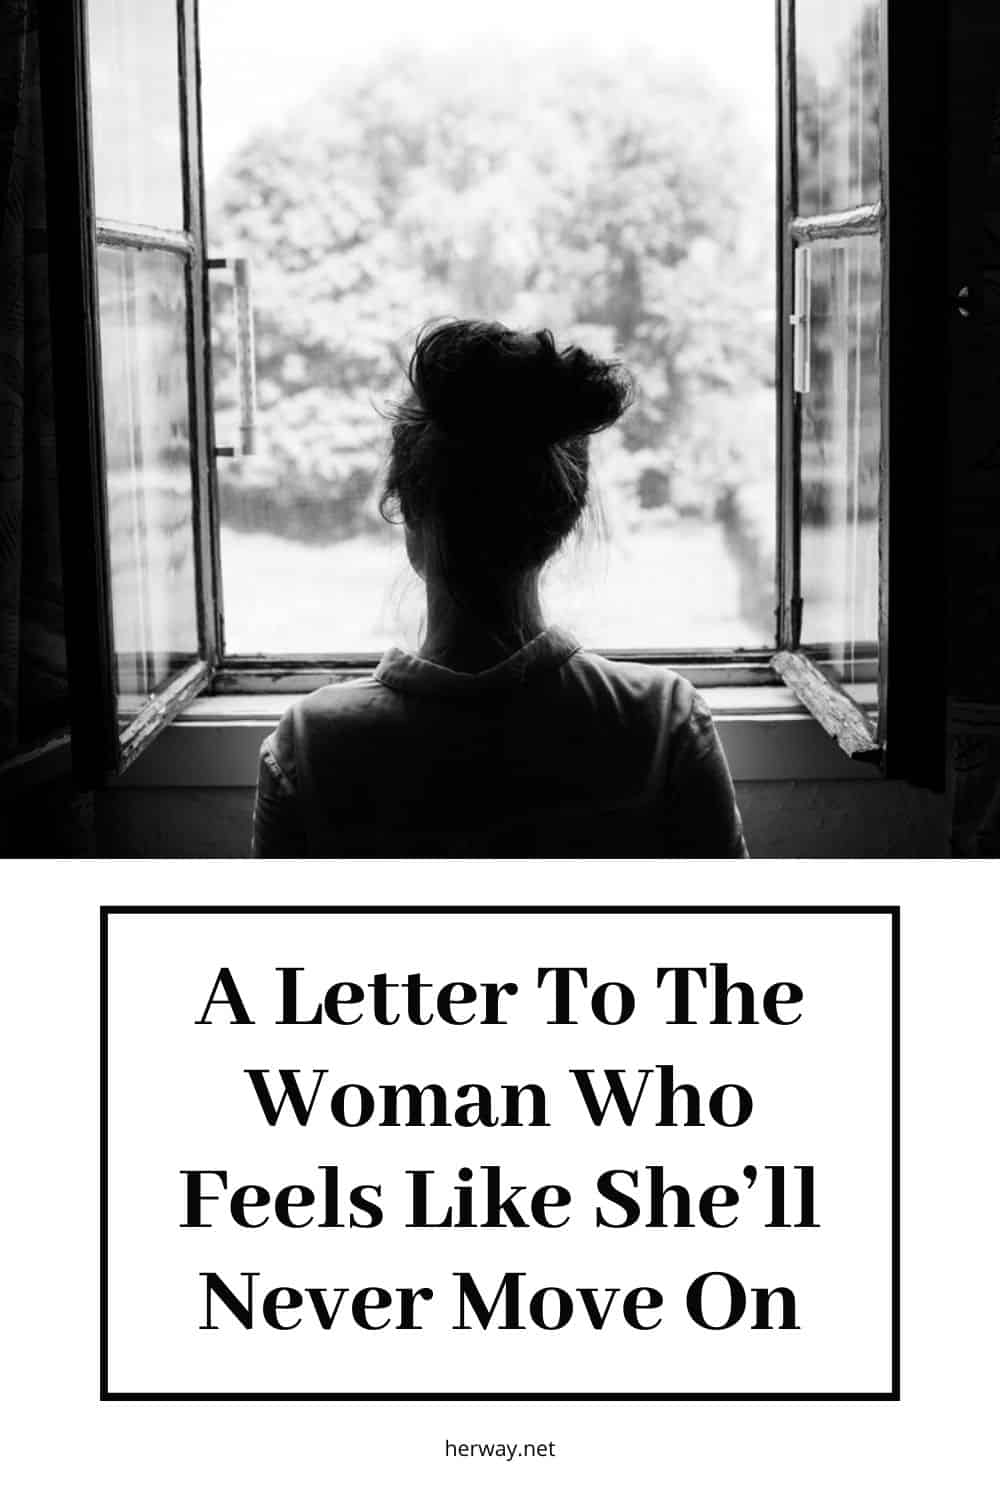 A Letter To The Woman Who Feels Like She’ll Never Move On